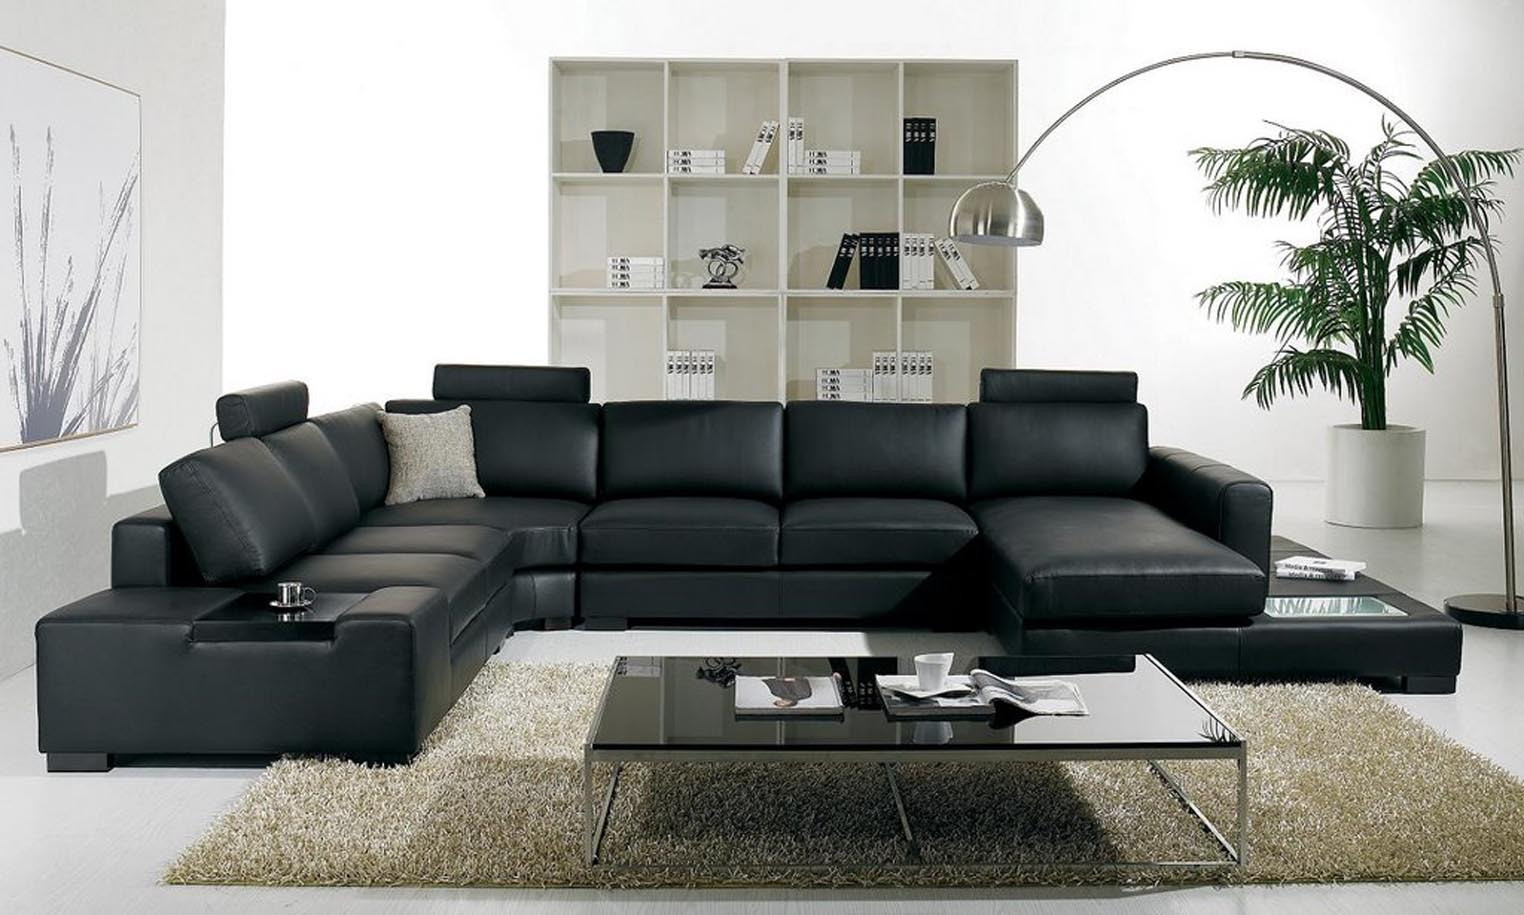 Black Sofa Living Room Ideas
 Simple Interior Design Tips To Make Over Your Living Room